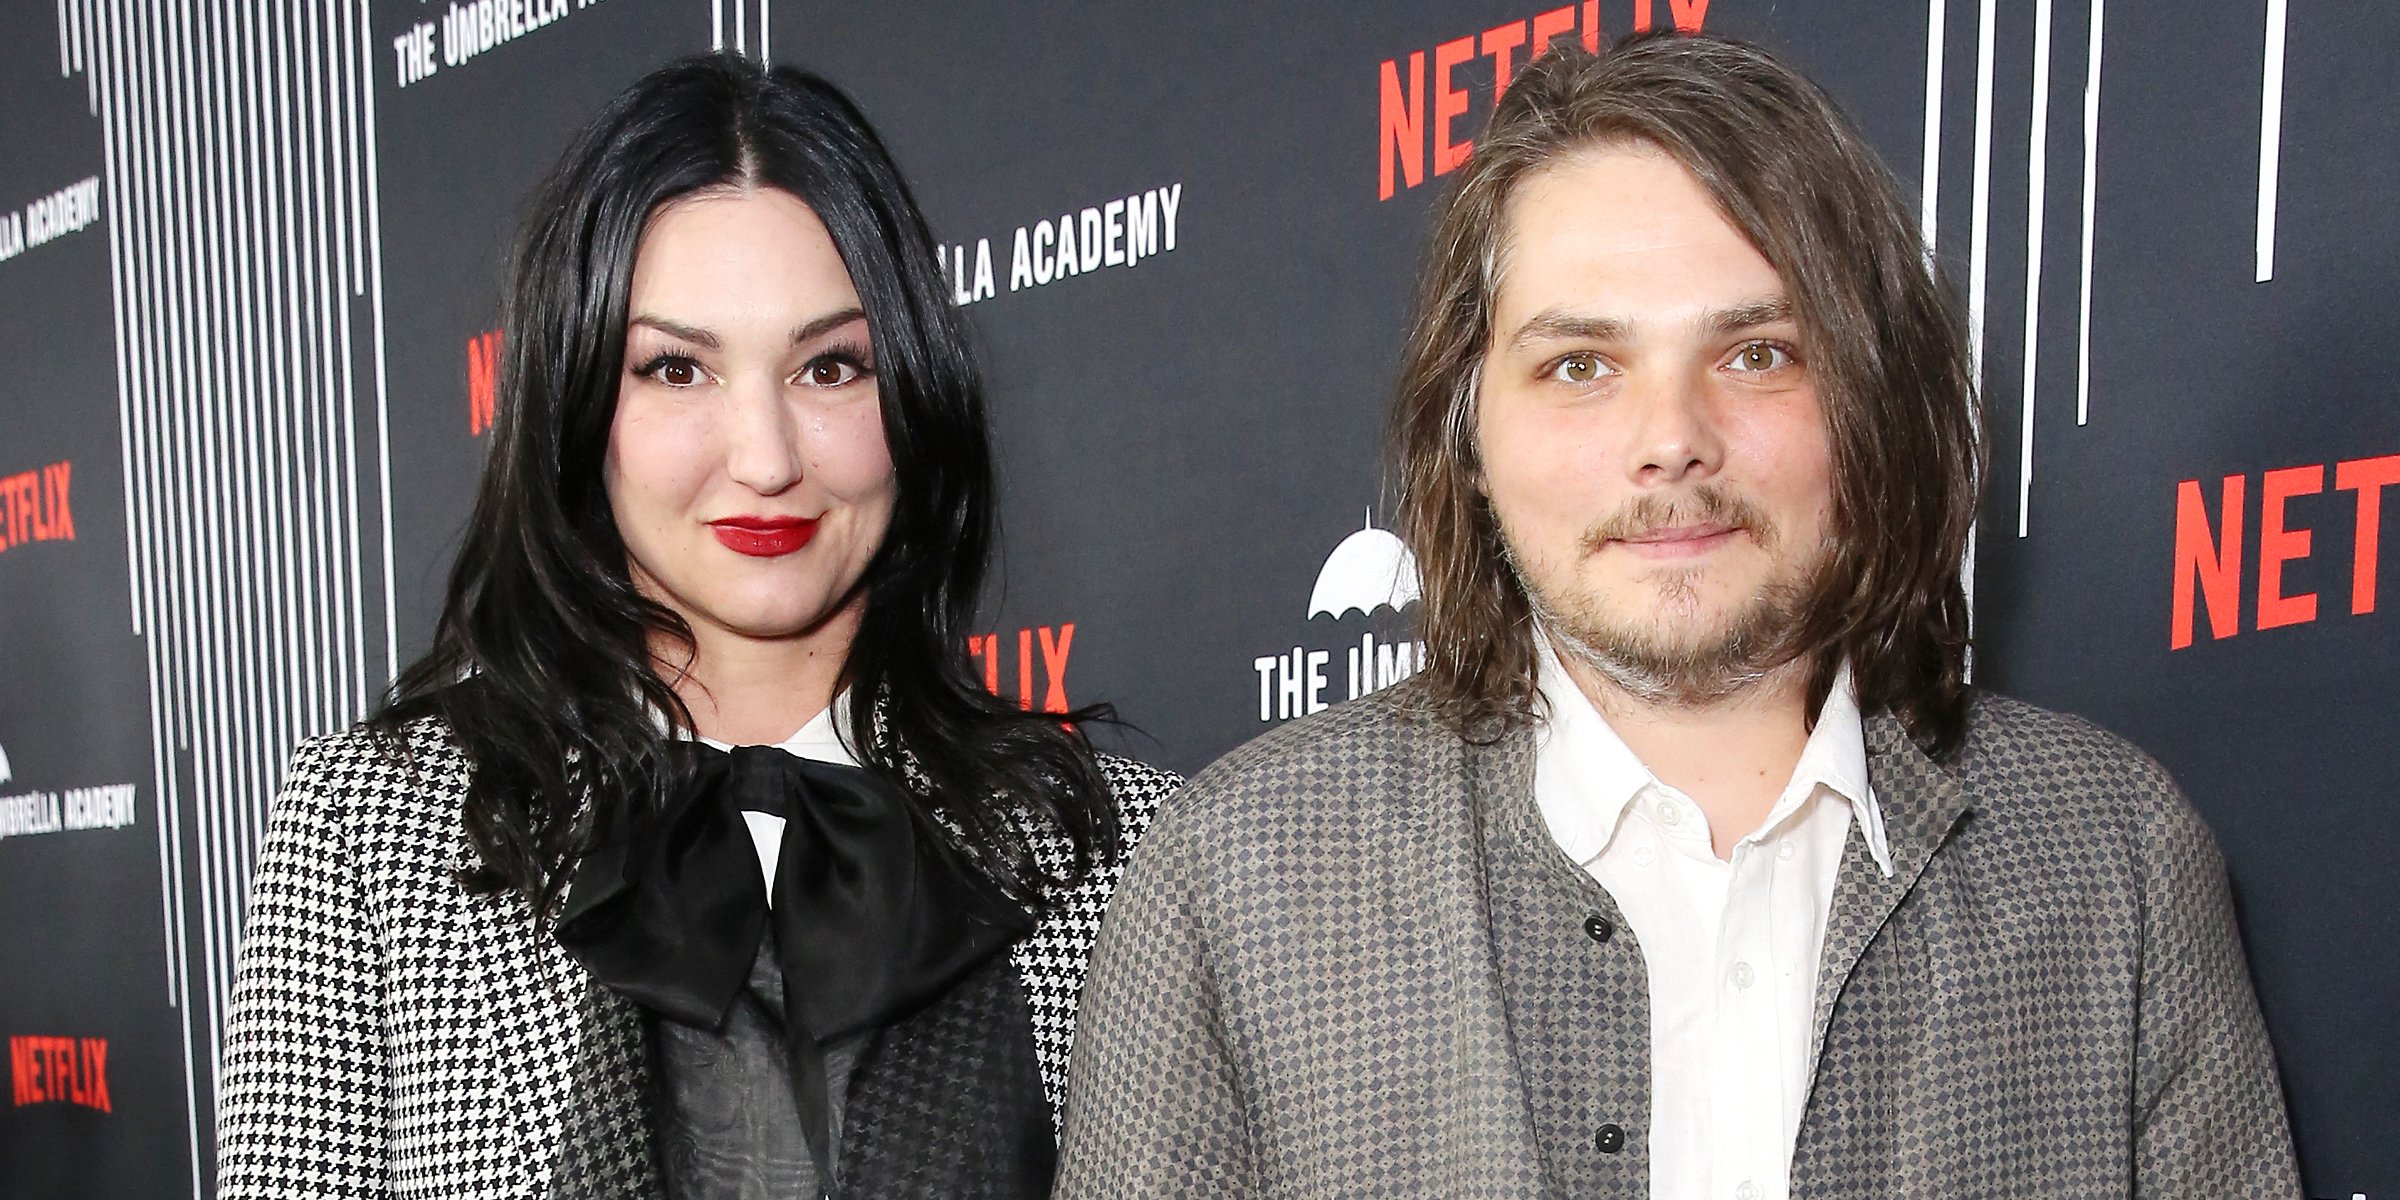 Lyn-Z and husband Gerard Way. | Source: Getty Images